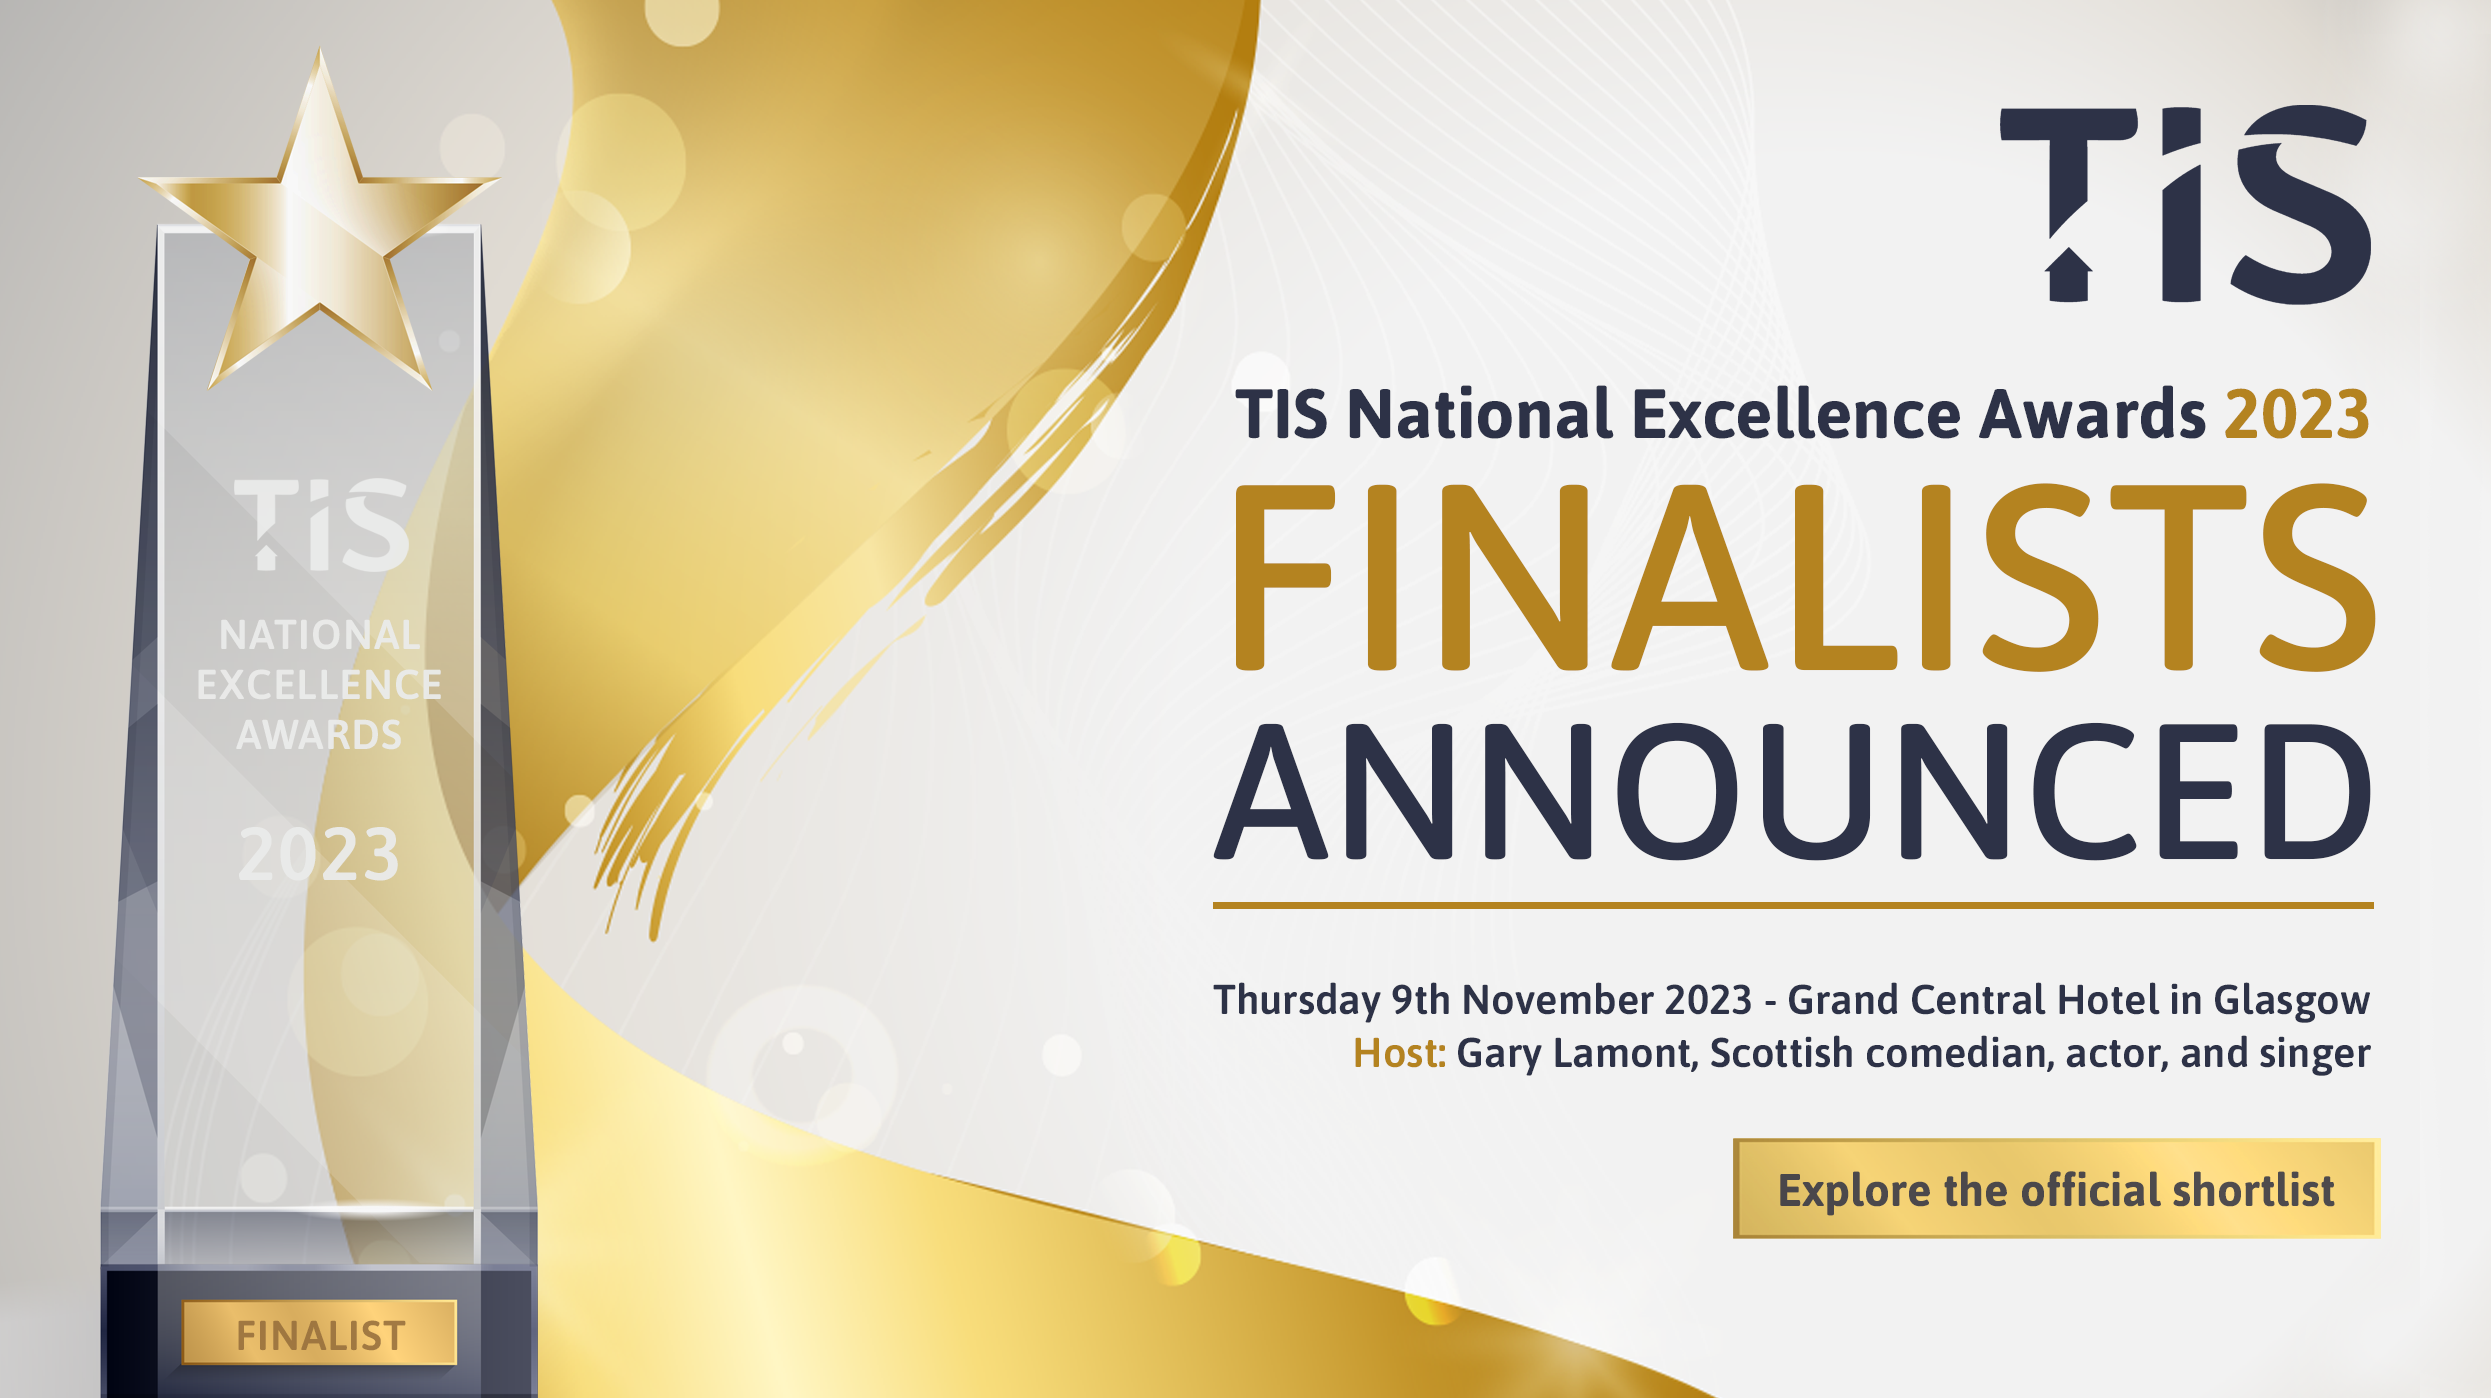 TIS National Excellence Awards finalists announced